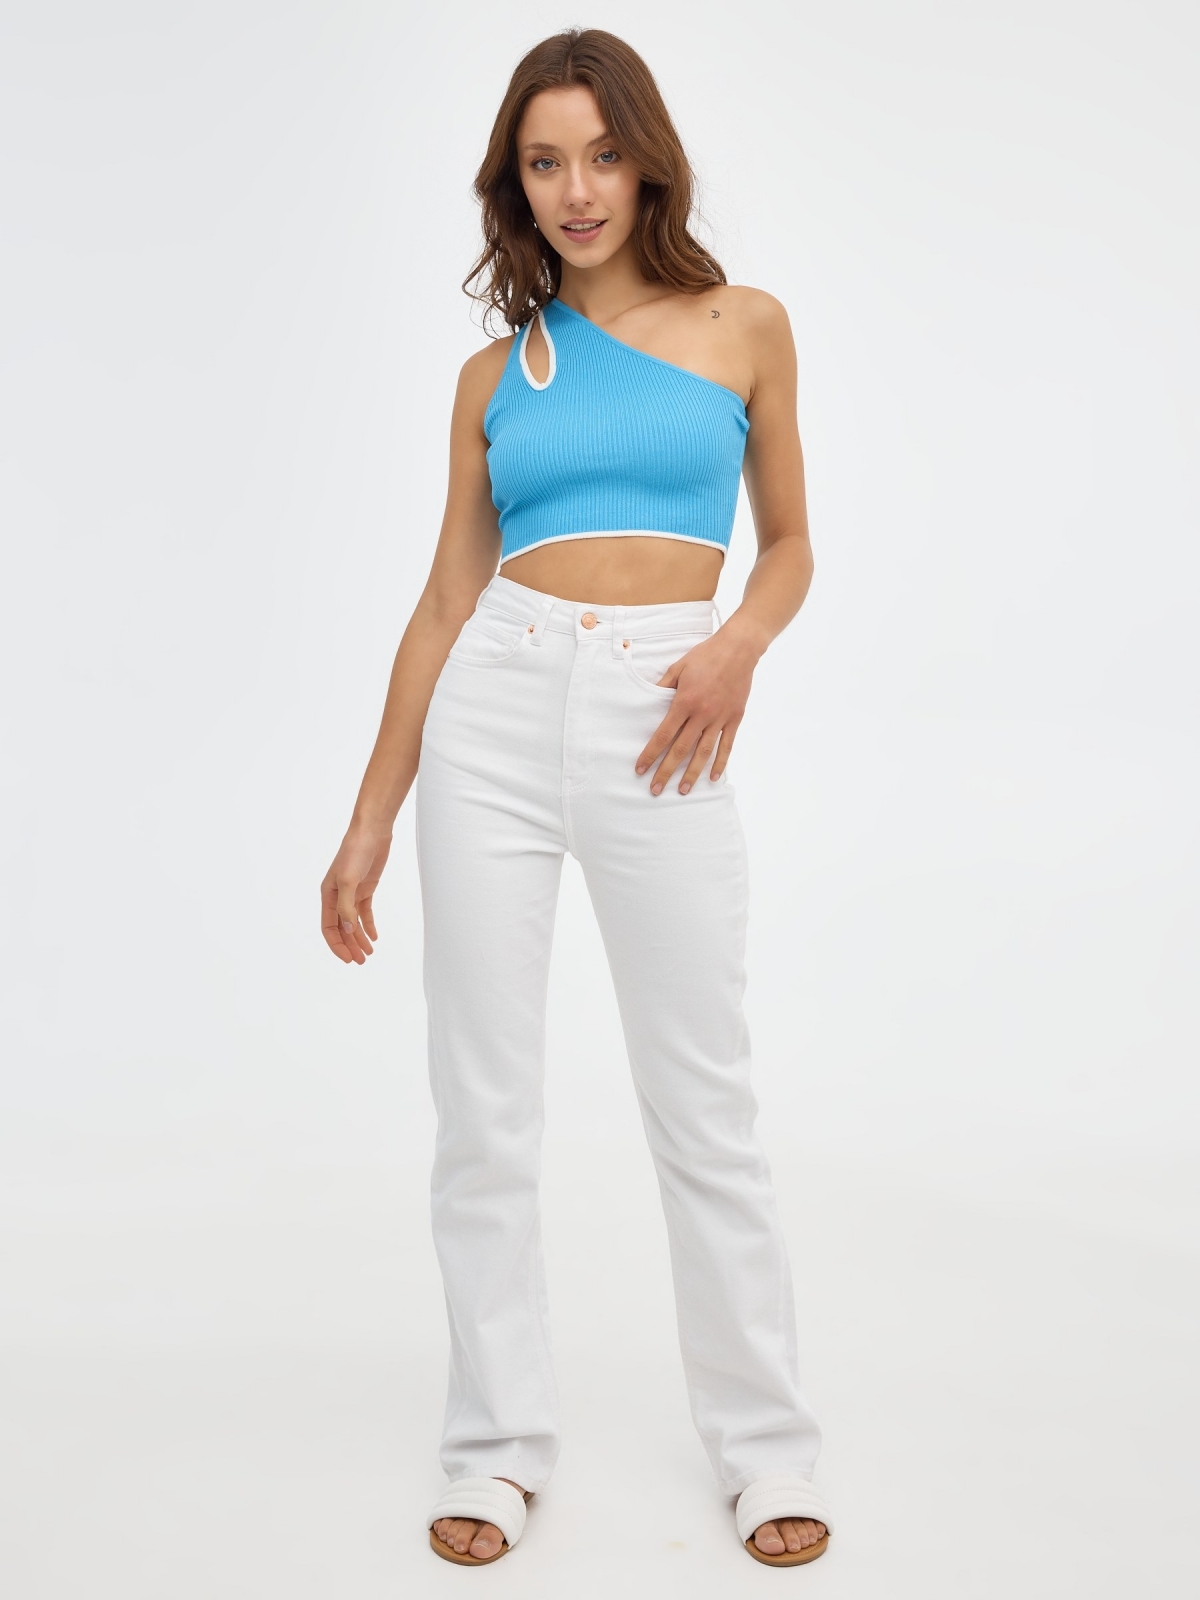 Asymmetrical knitted top sky blue front view